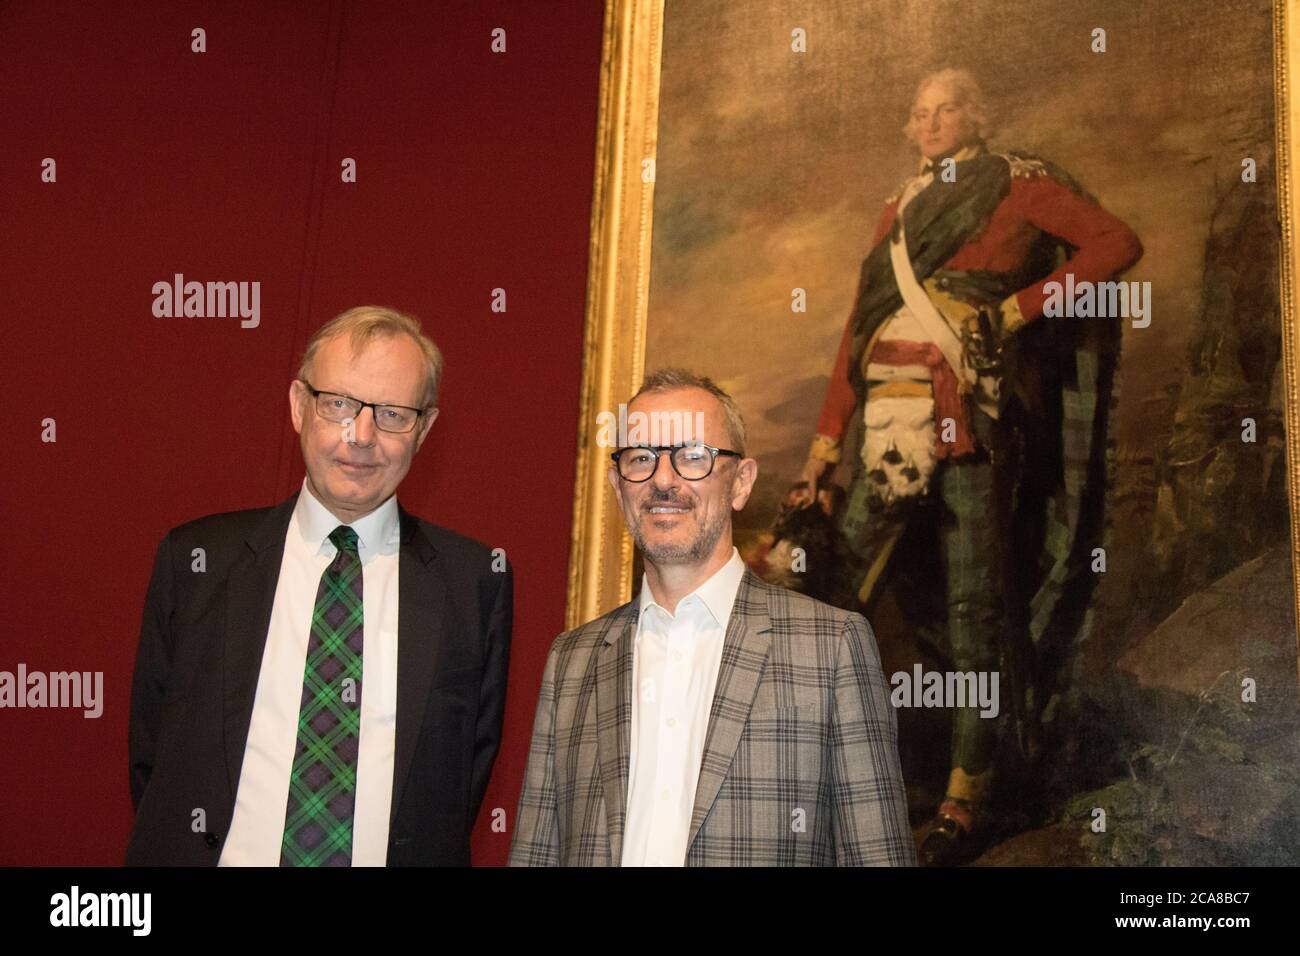 Michael Clarke, CBE, director of the Scottish National Gallery and Michael Brand, director of the AGNSW in front of a painting of Sir John Sinclair of Stock Photo